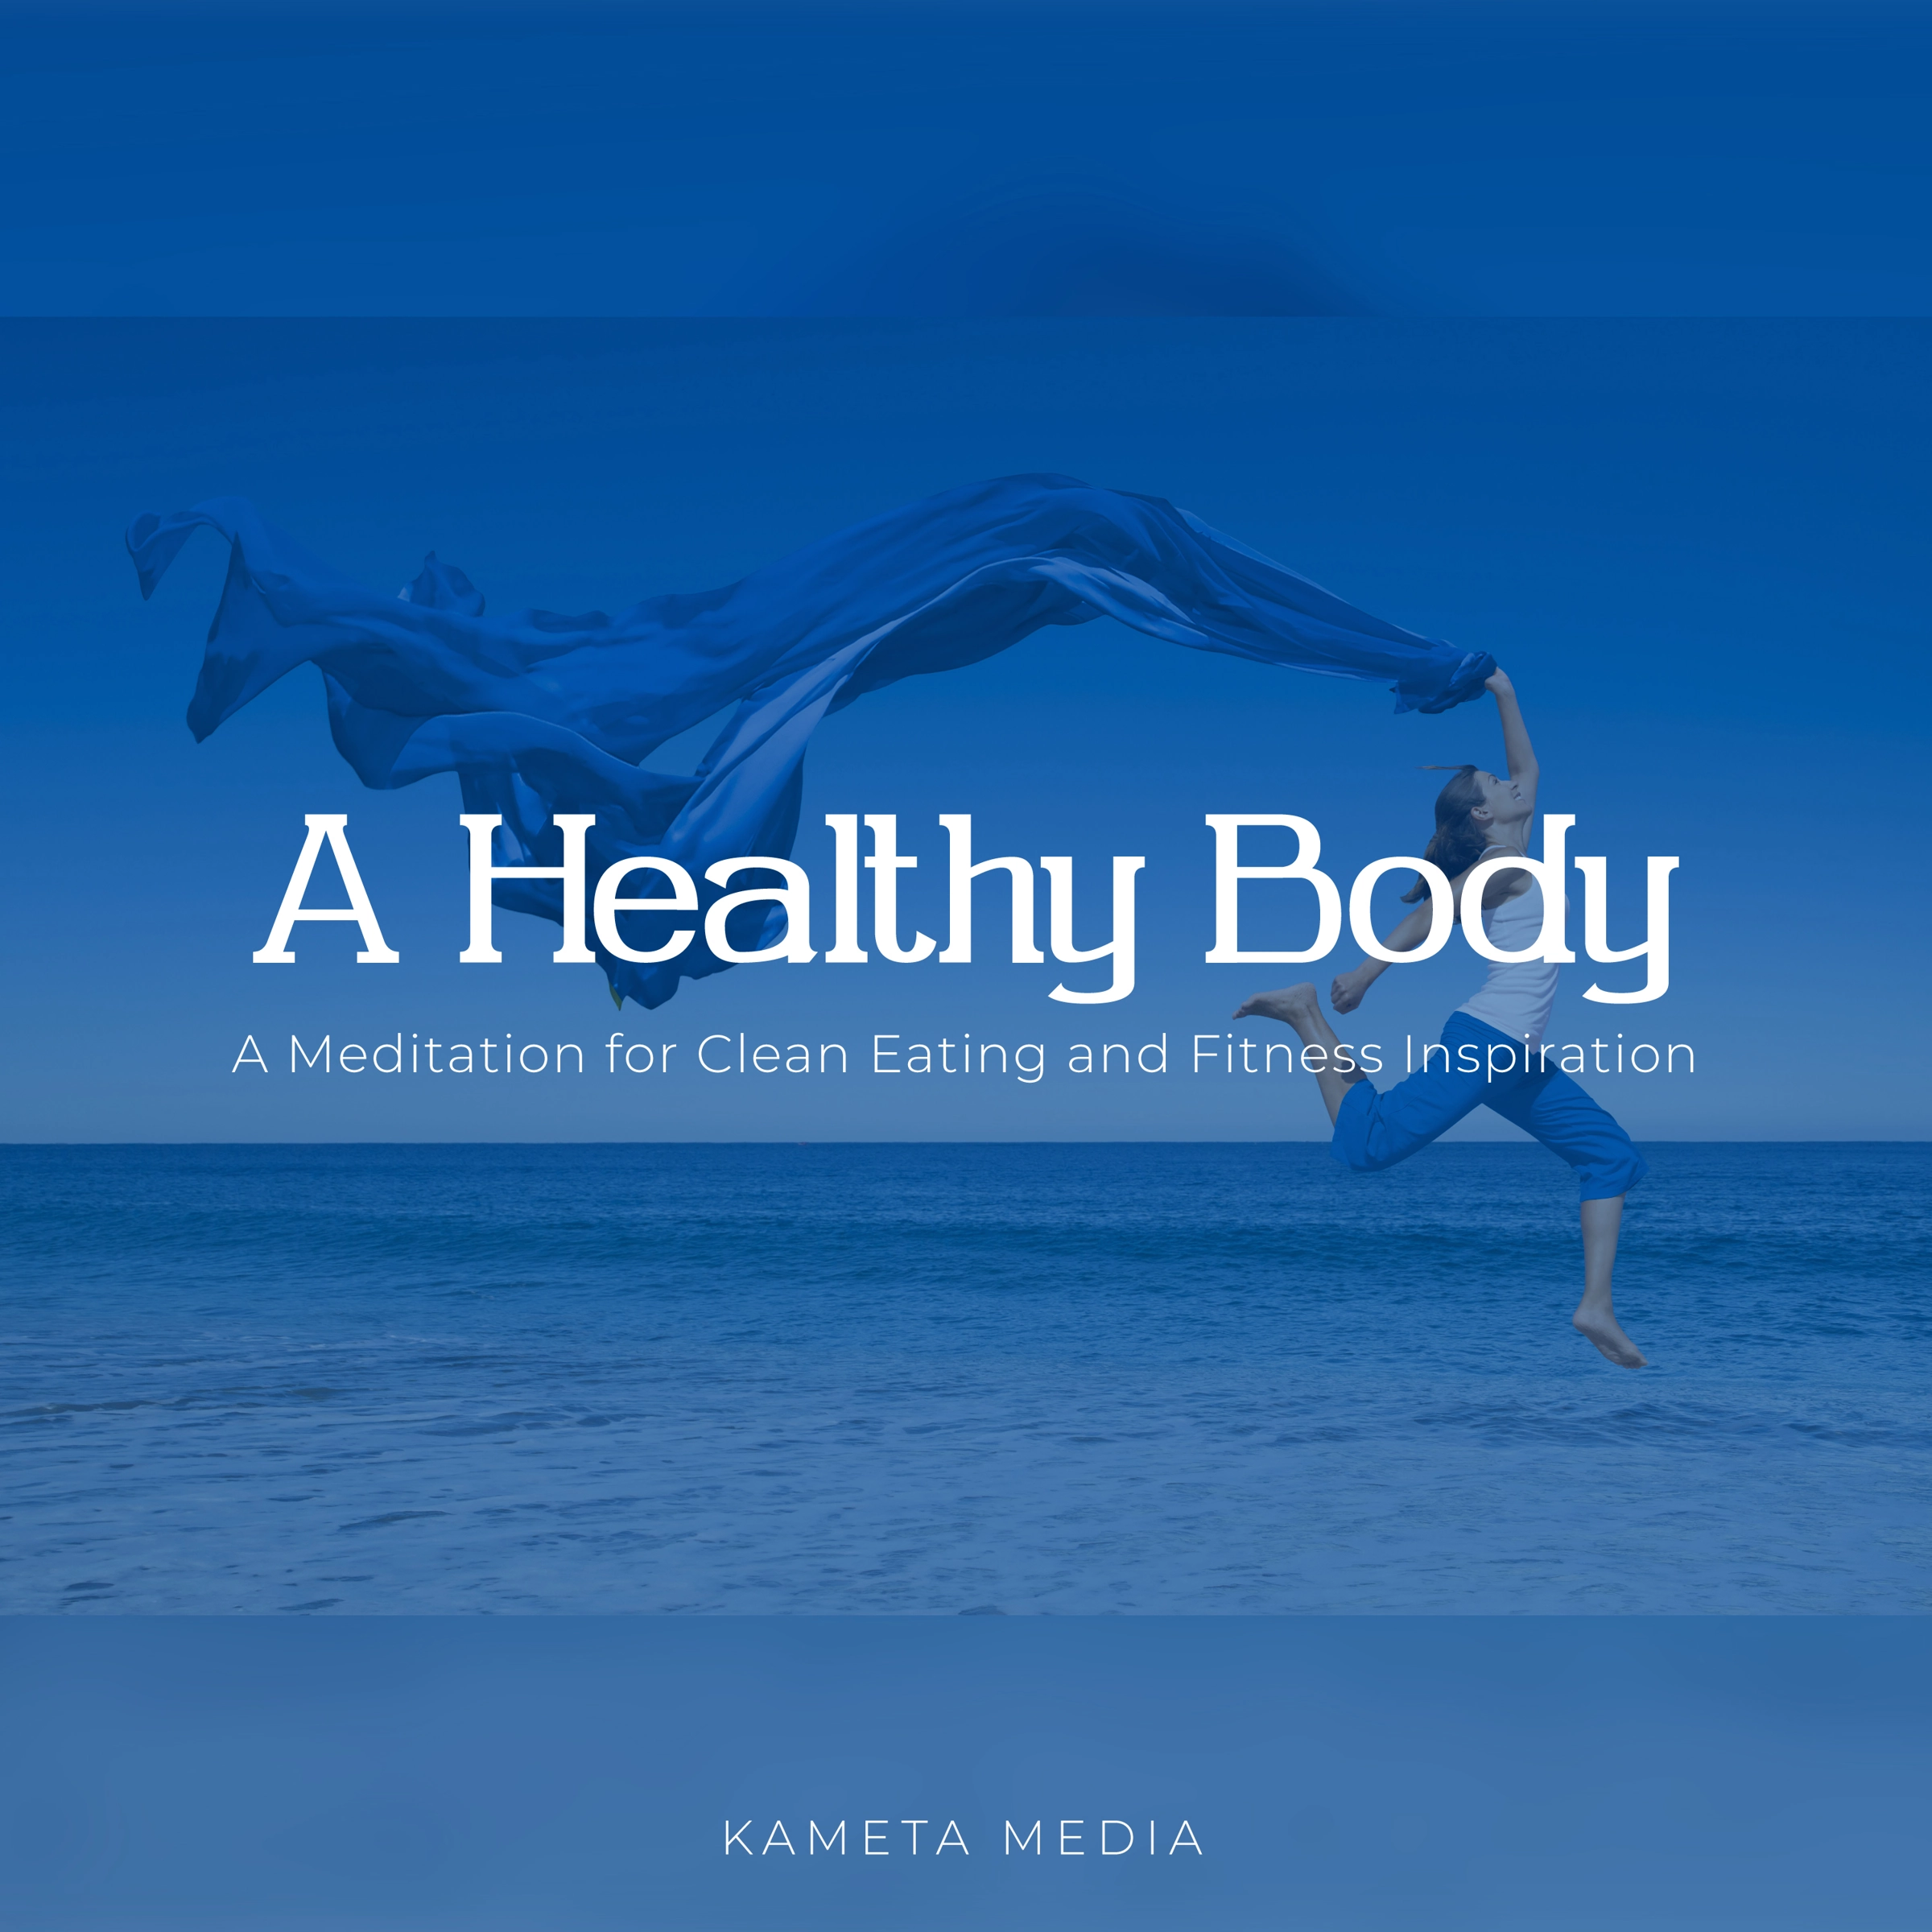 A Healthy Body: A Meditation for Clean Eating and Fitness Inspiration Audiobook by Kameta Media